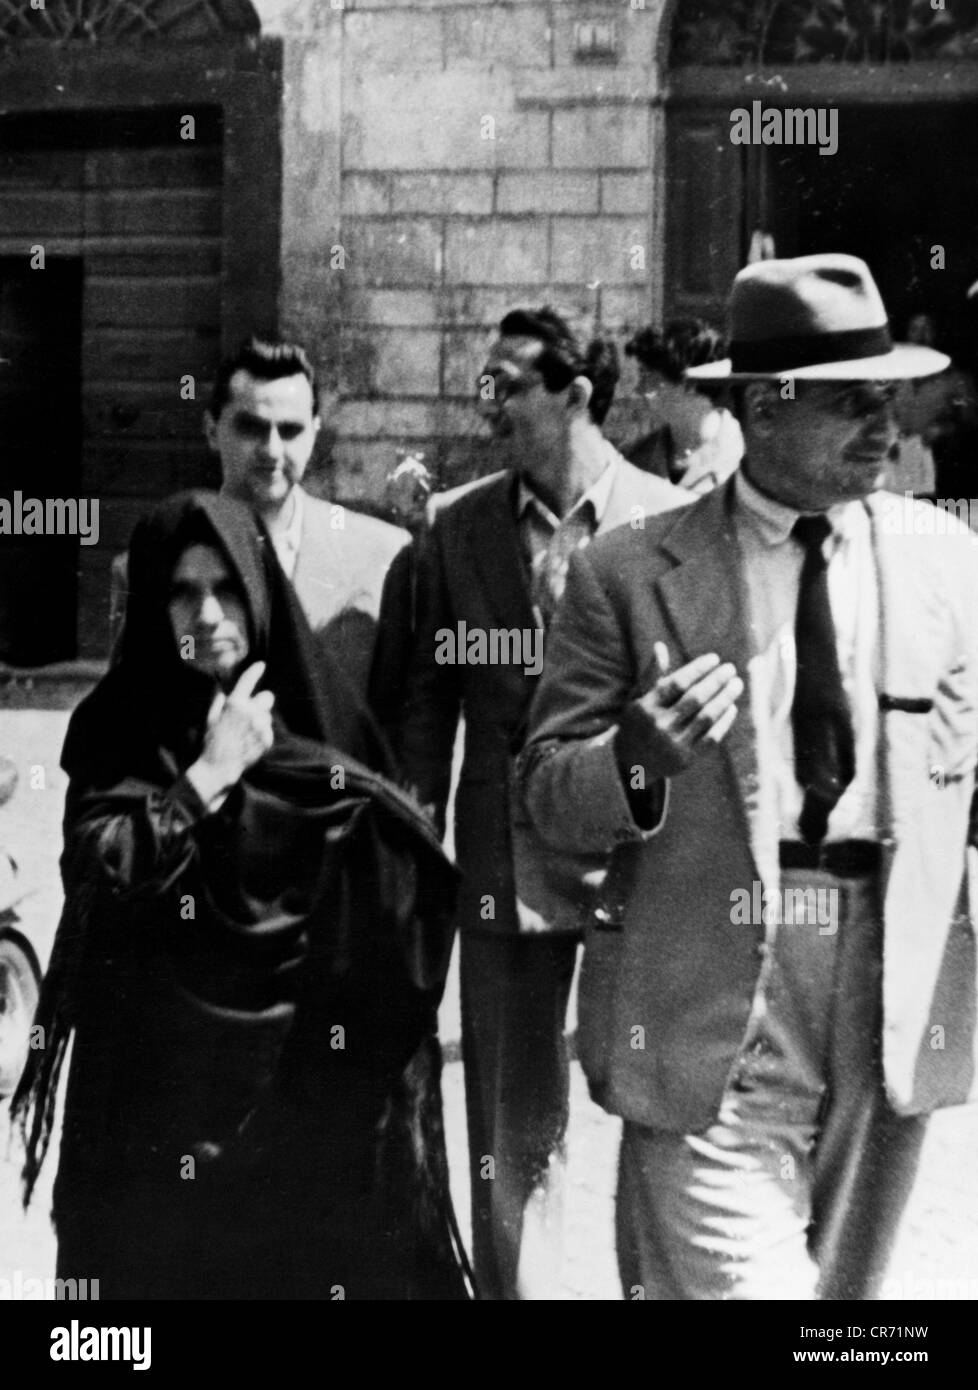 Giuliano, Salvatore, 16.11.1922 - 5.7.1950, Sicilian bandit,  his mother Maria Lombardo and hist brother Giuseppe after testimony before court, Ginestra, Sicily, 27.7.1951, , Stock Photo